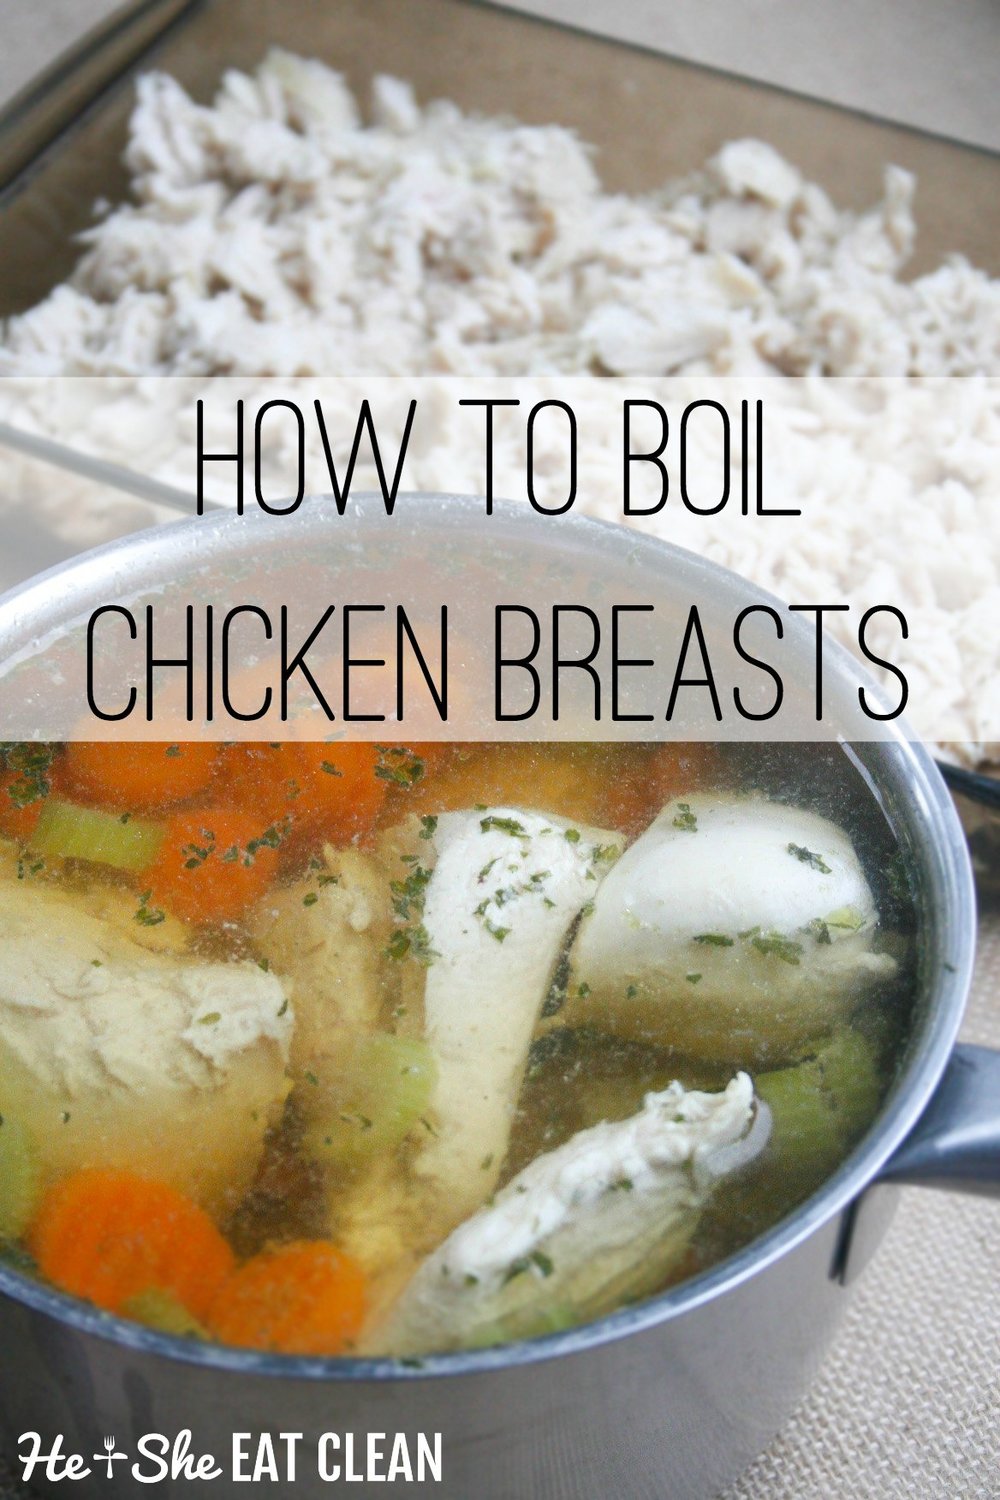 How To Boil Chicken Breasts,Spicy Thai Noodles Recipe